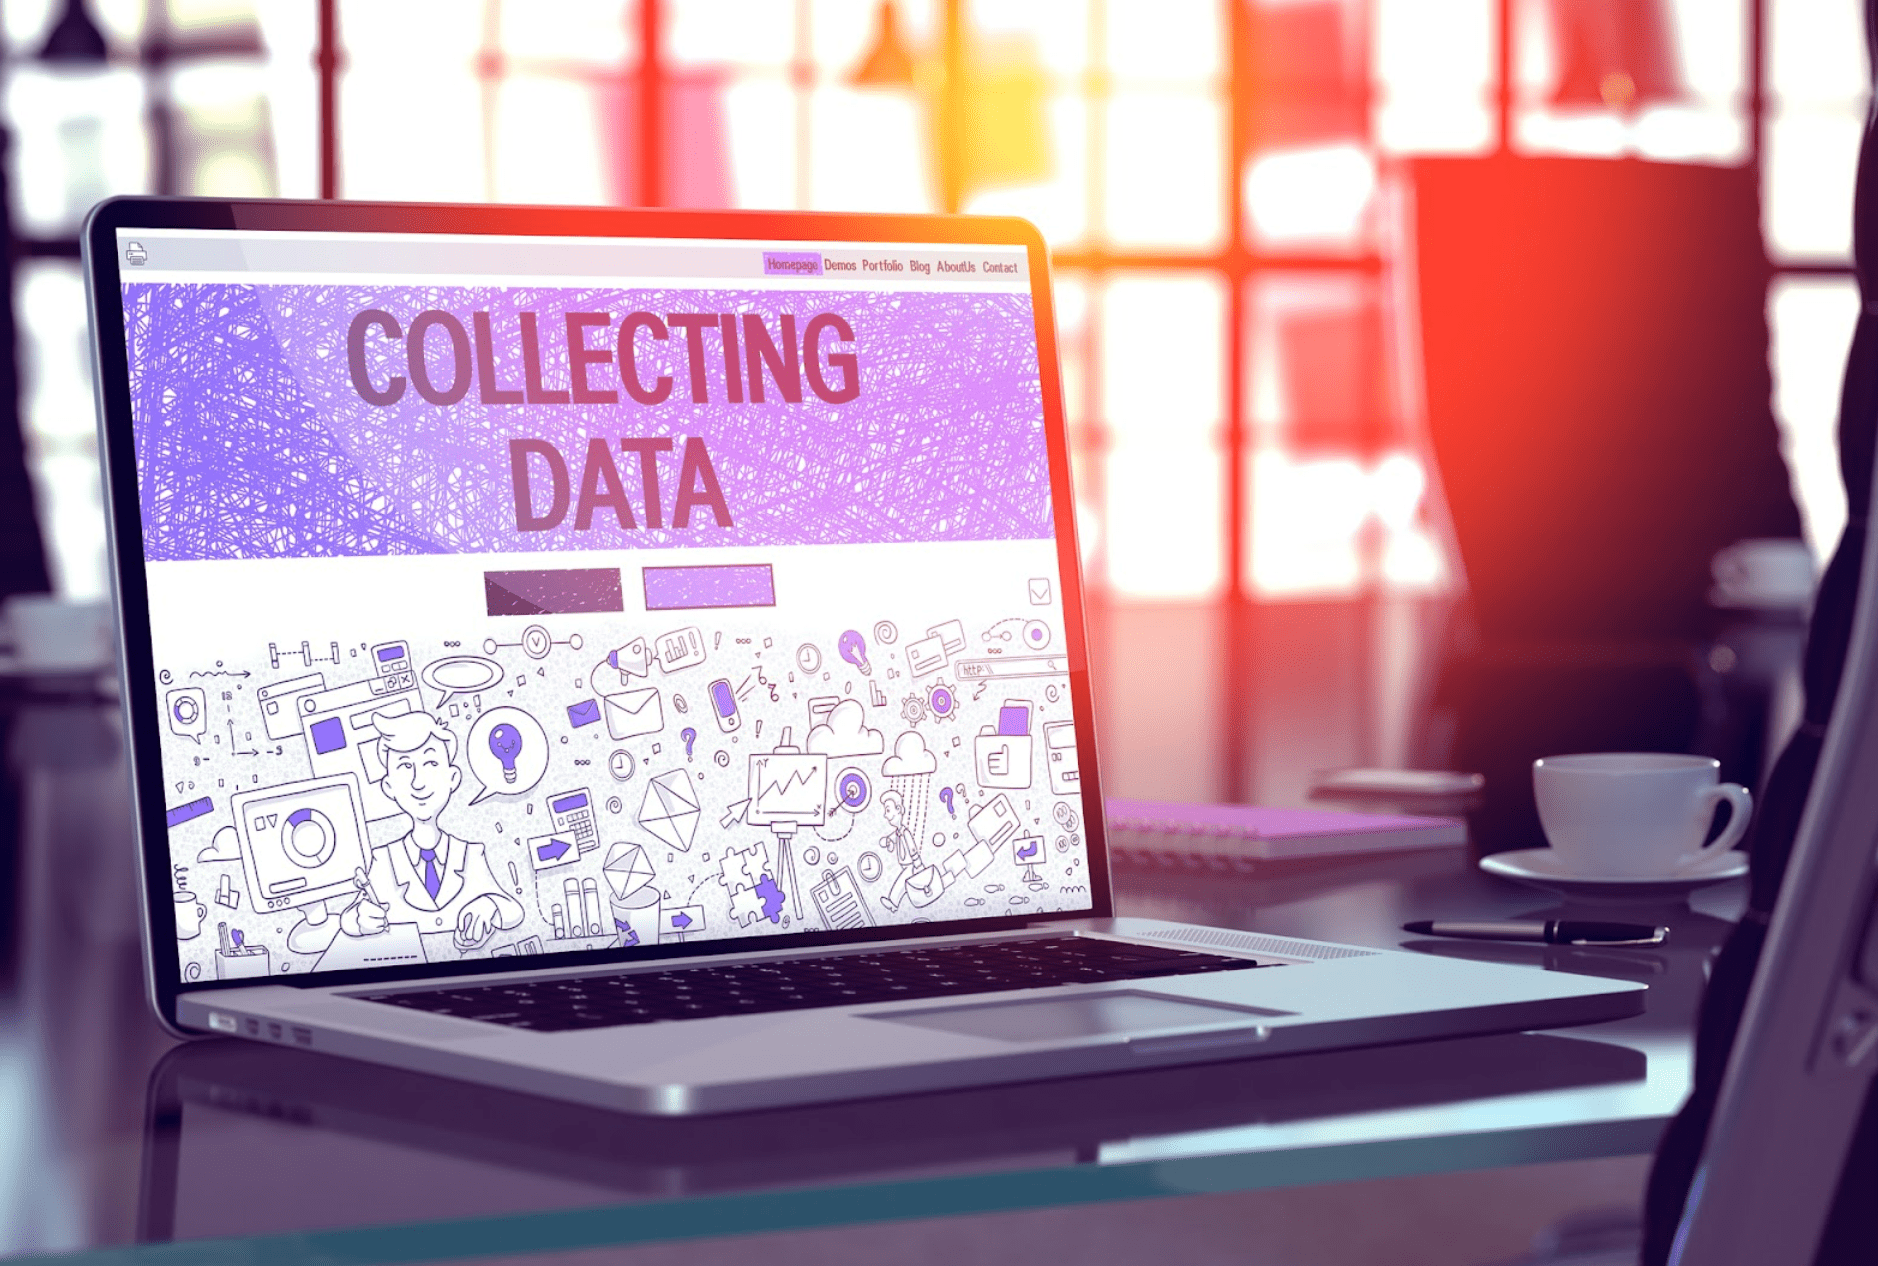 Collecting Past Events’ Data to Improve Your Next Event